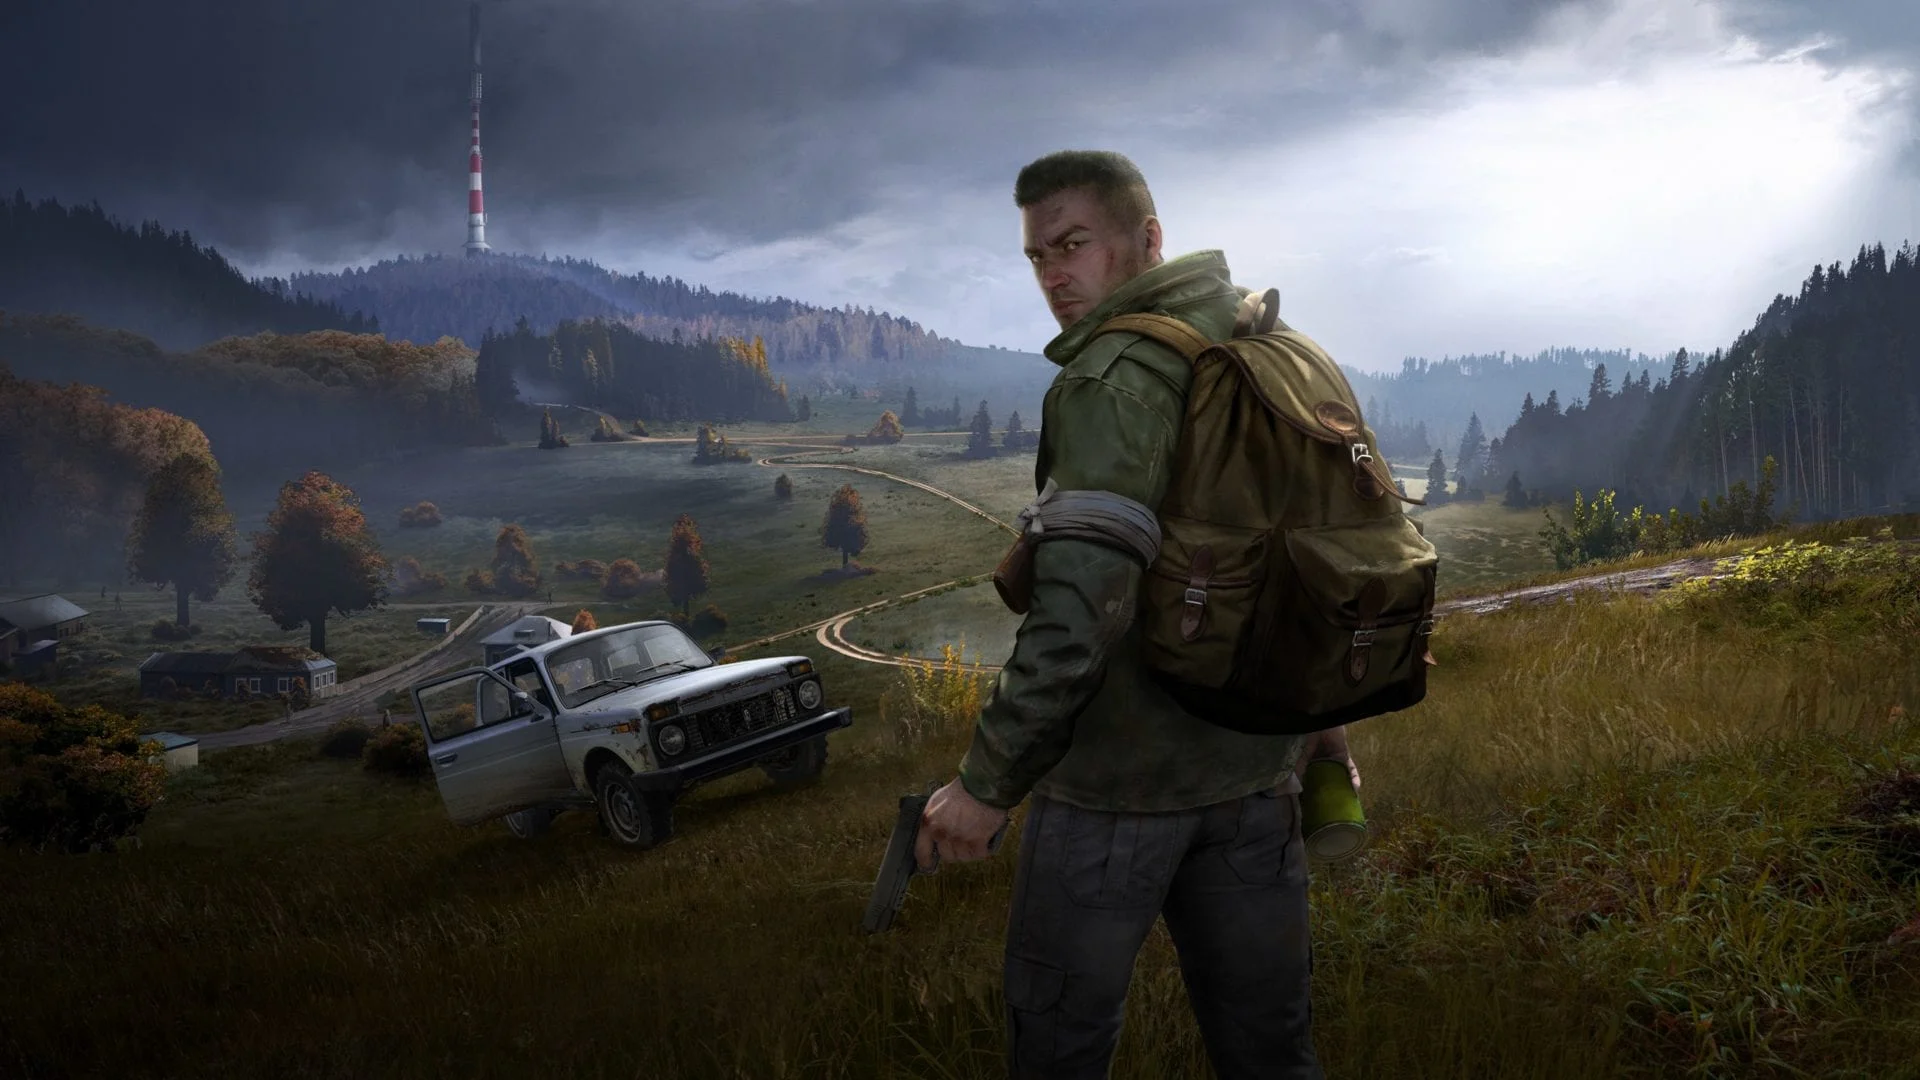 DayZ developers are teaming up again for a “massive” new survival game